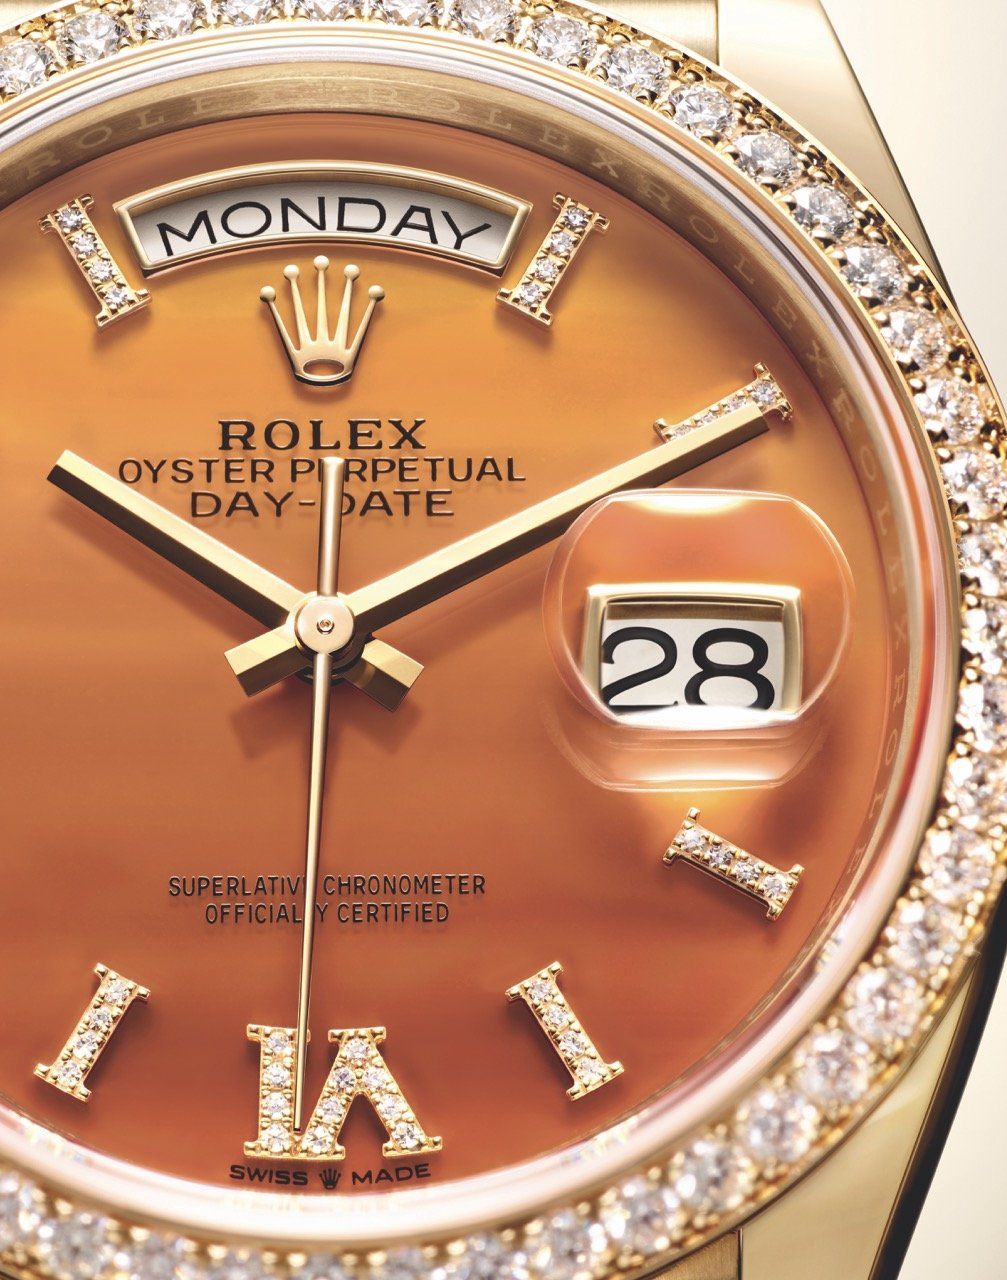 The latest Day-Date 36 models mark the return of the stone dials